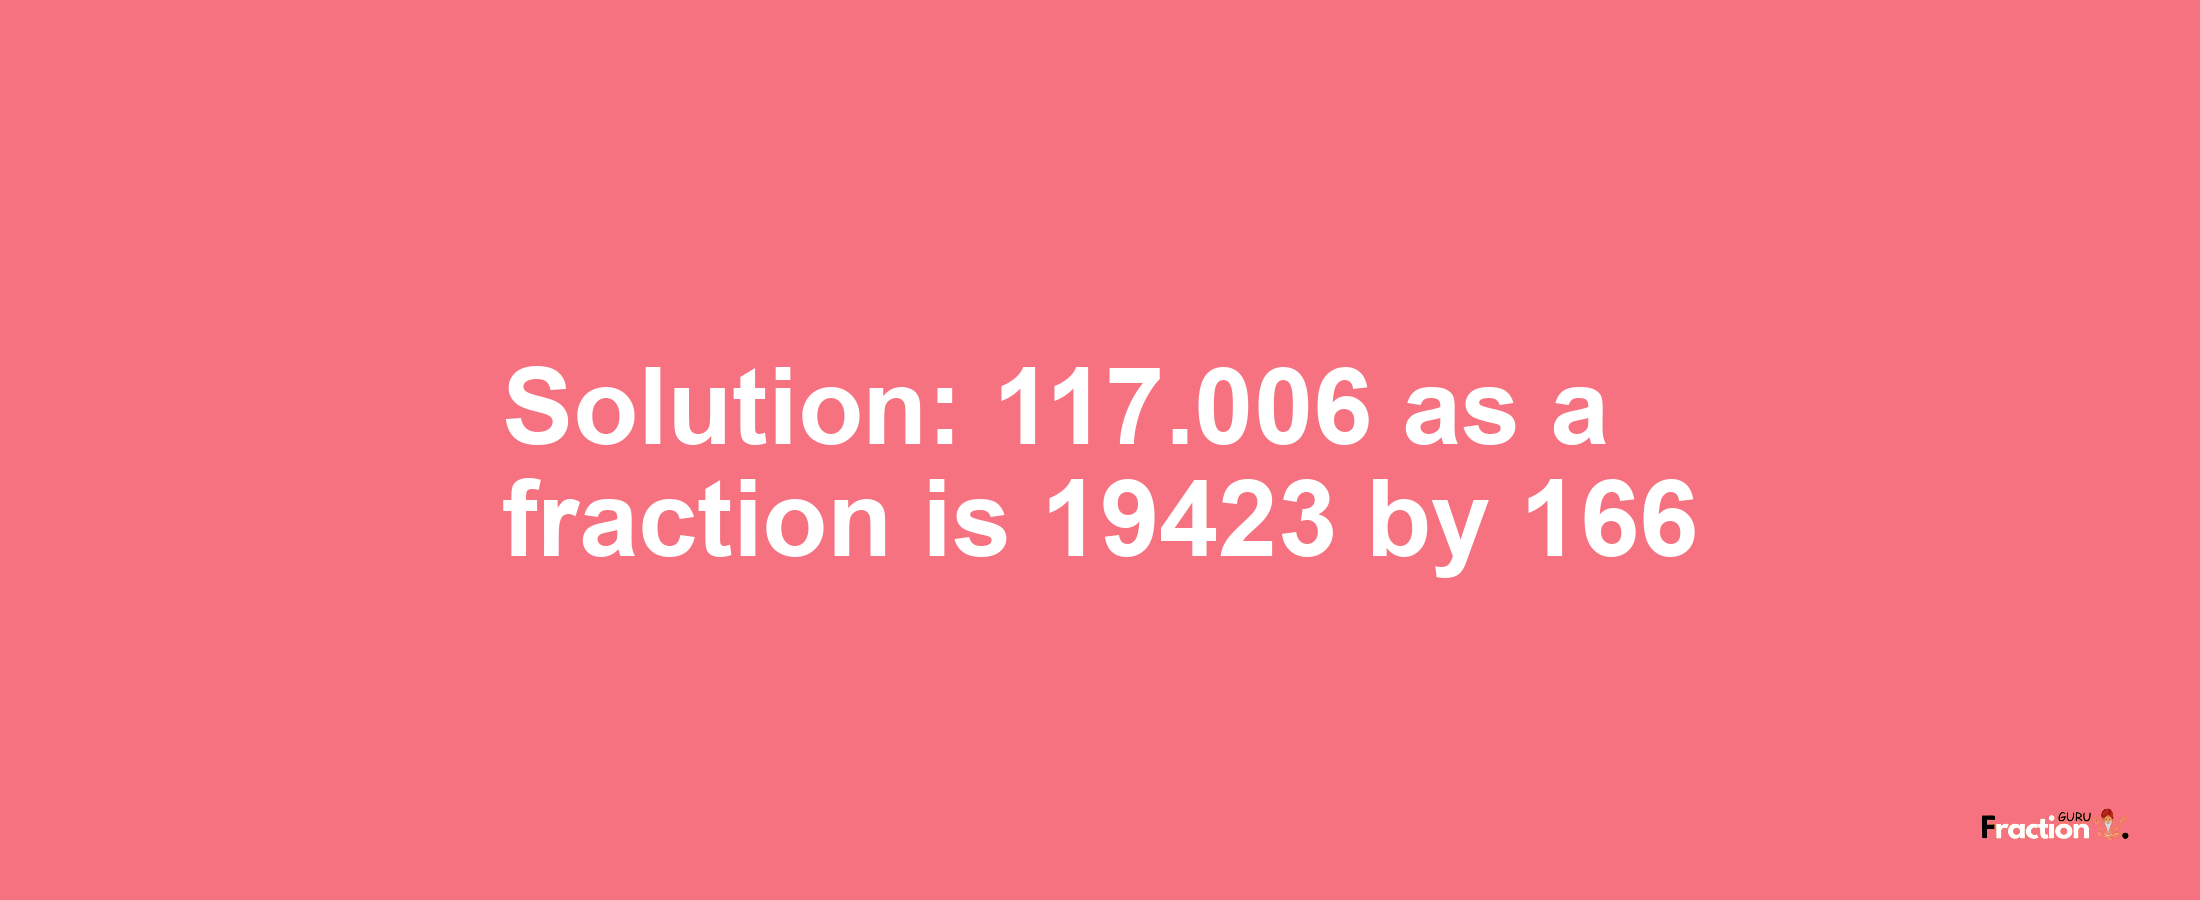 Solution:117.006 as a fraction is 19423/166